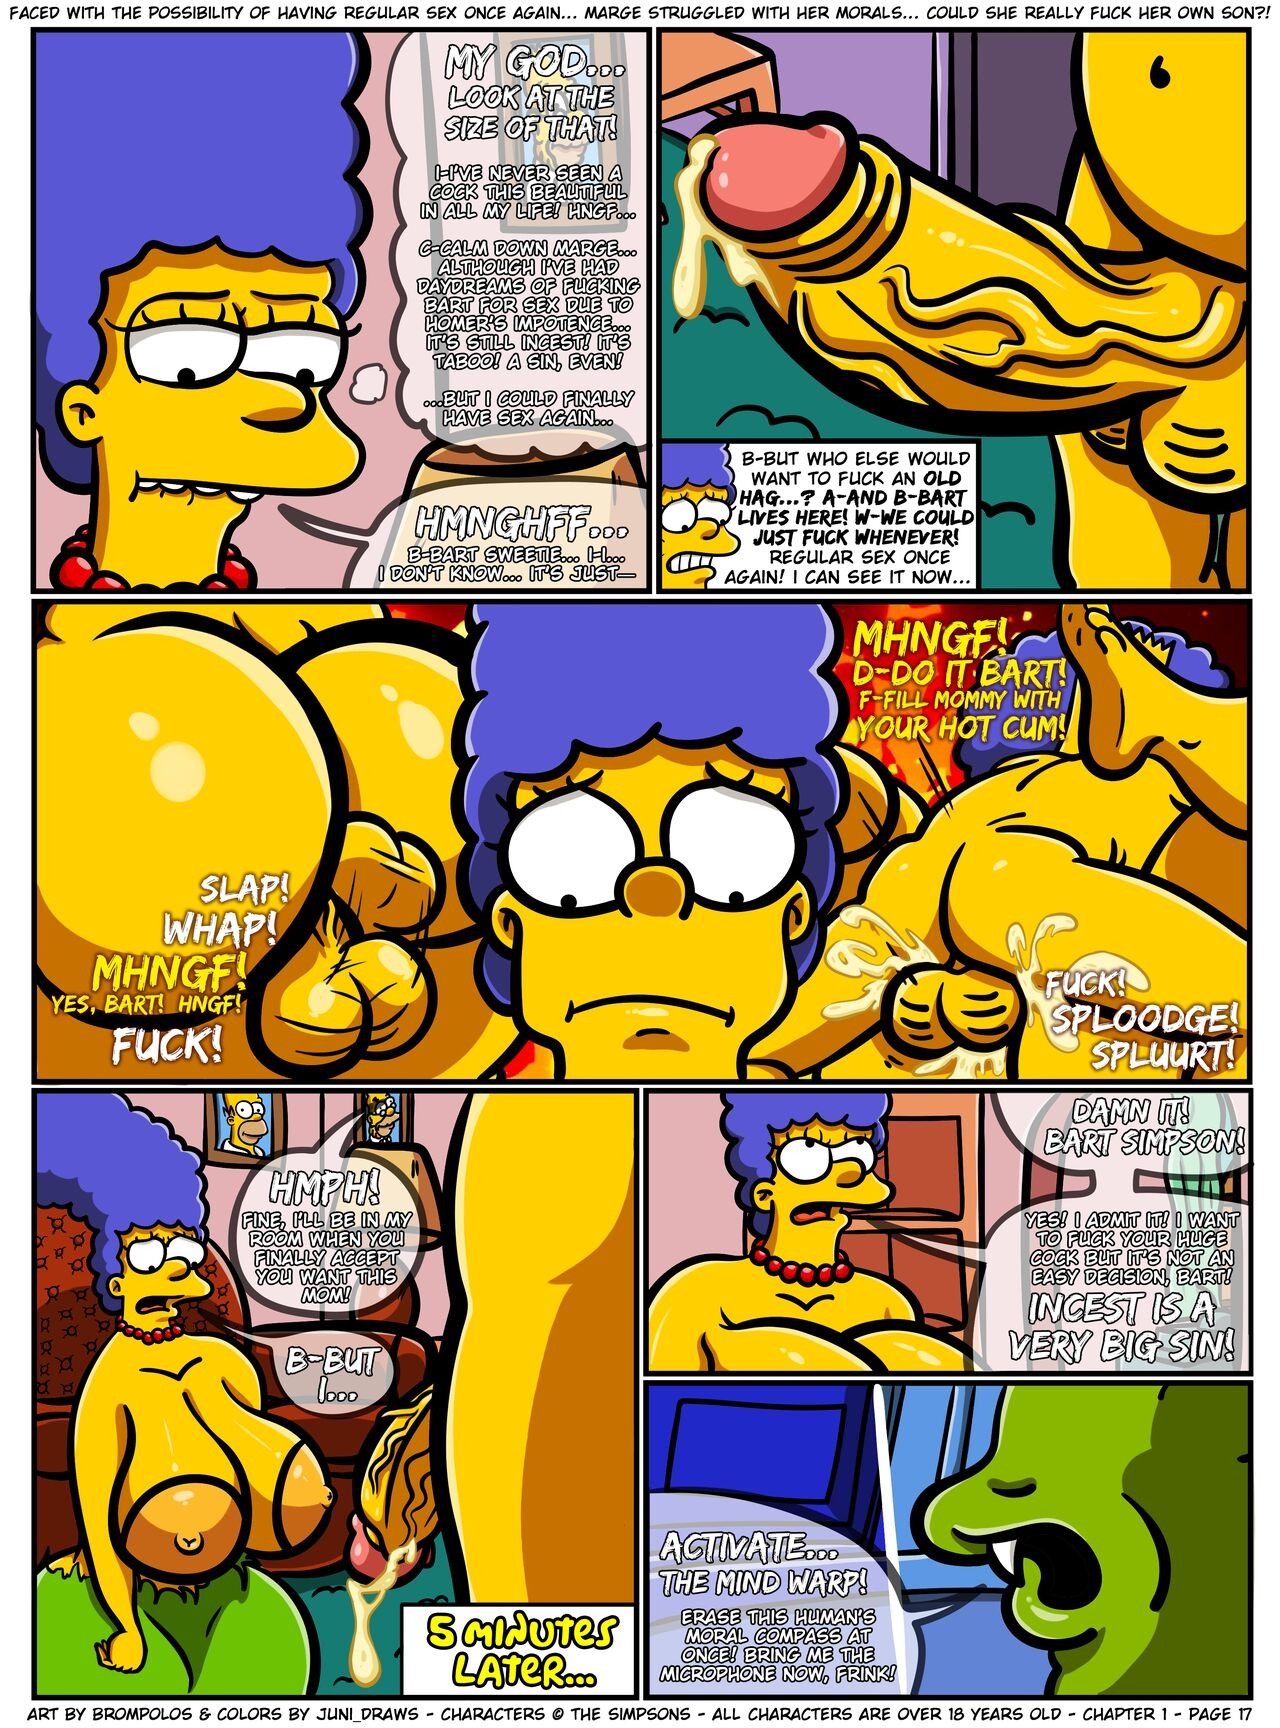 [Brompolos/Juni_Draws] The Sexensteins (Simpsons) [Ongoing] 17